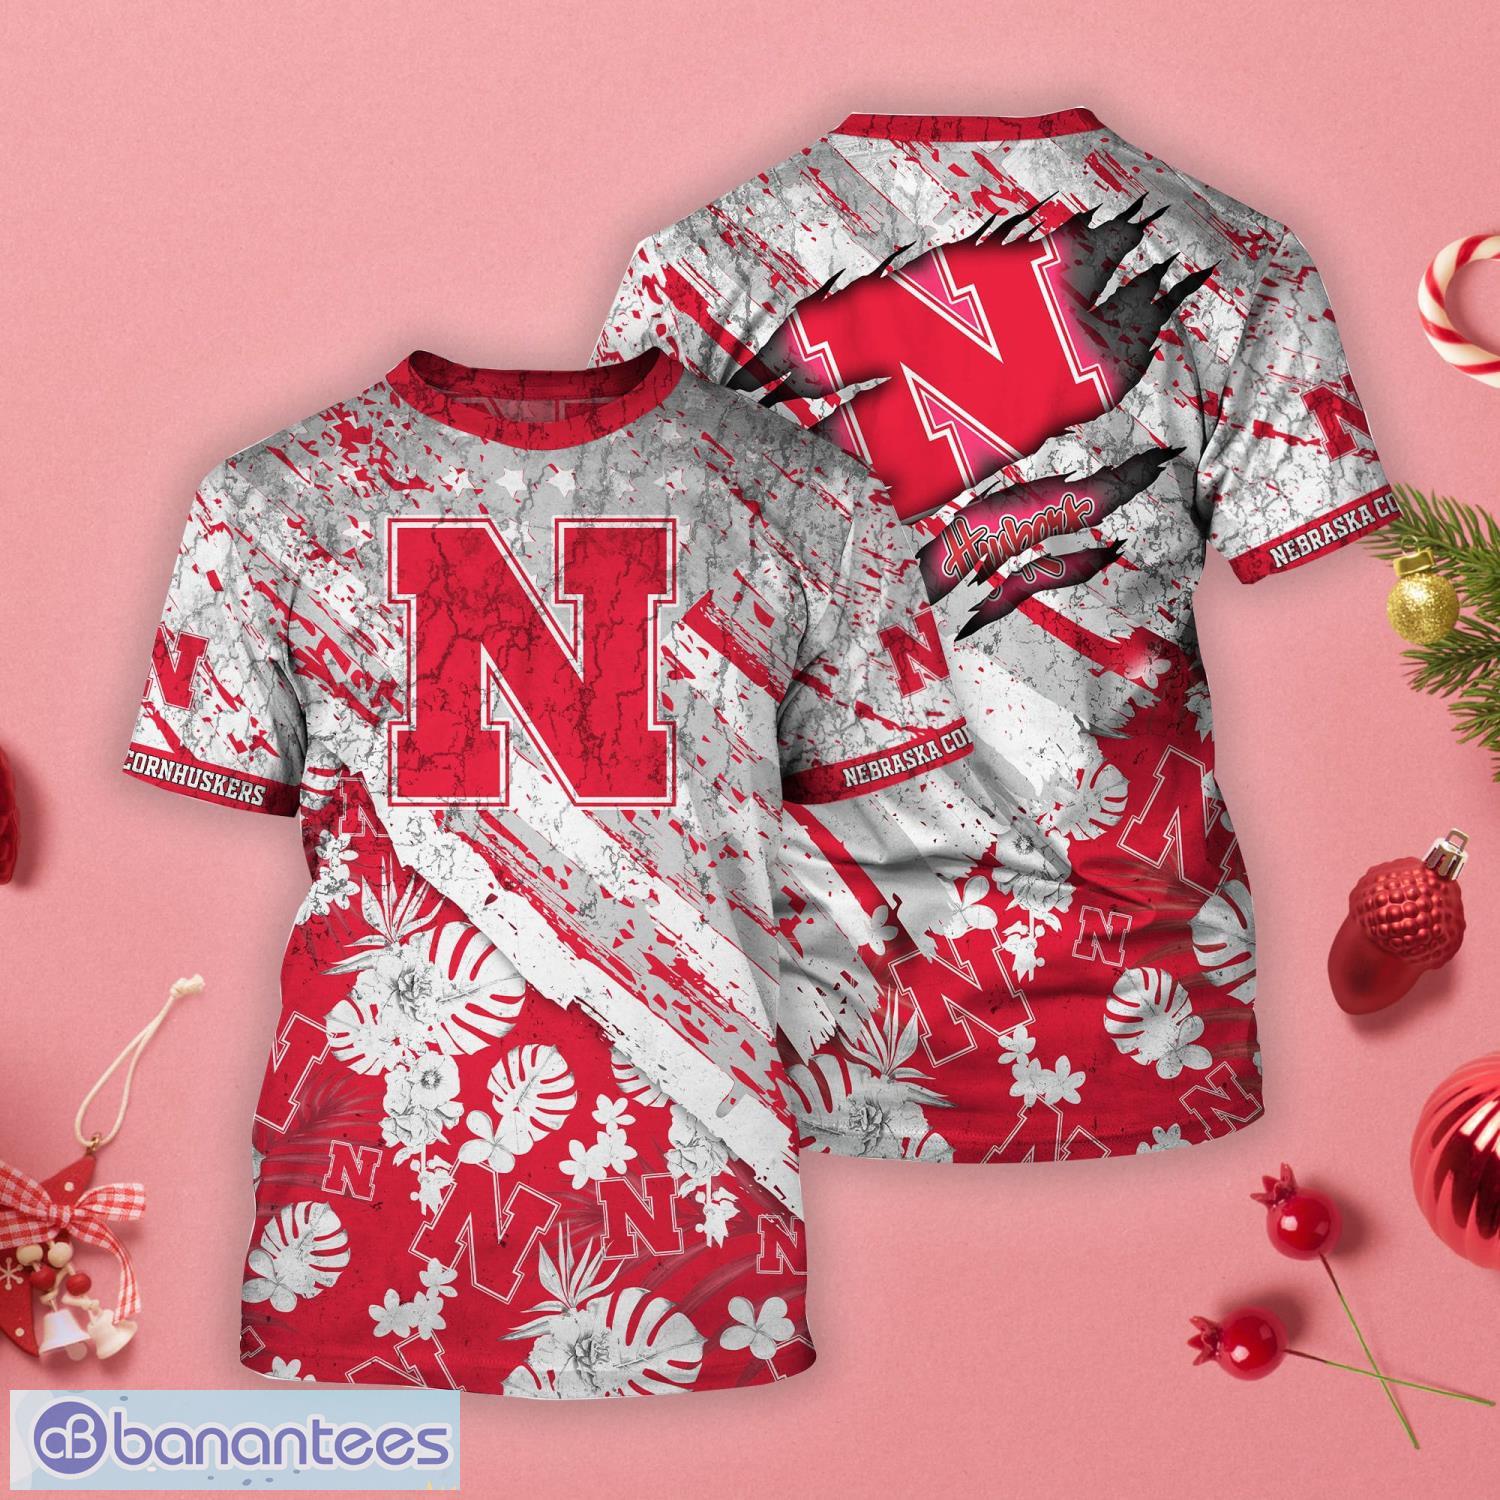 Nebraska Cornhuskers Tropical Flower Style And Flag All Over Printed 3D T-Shirt Product Photo 1